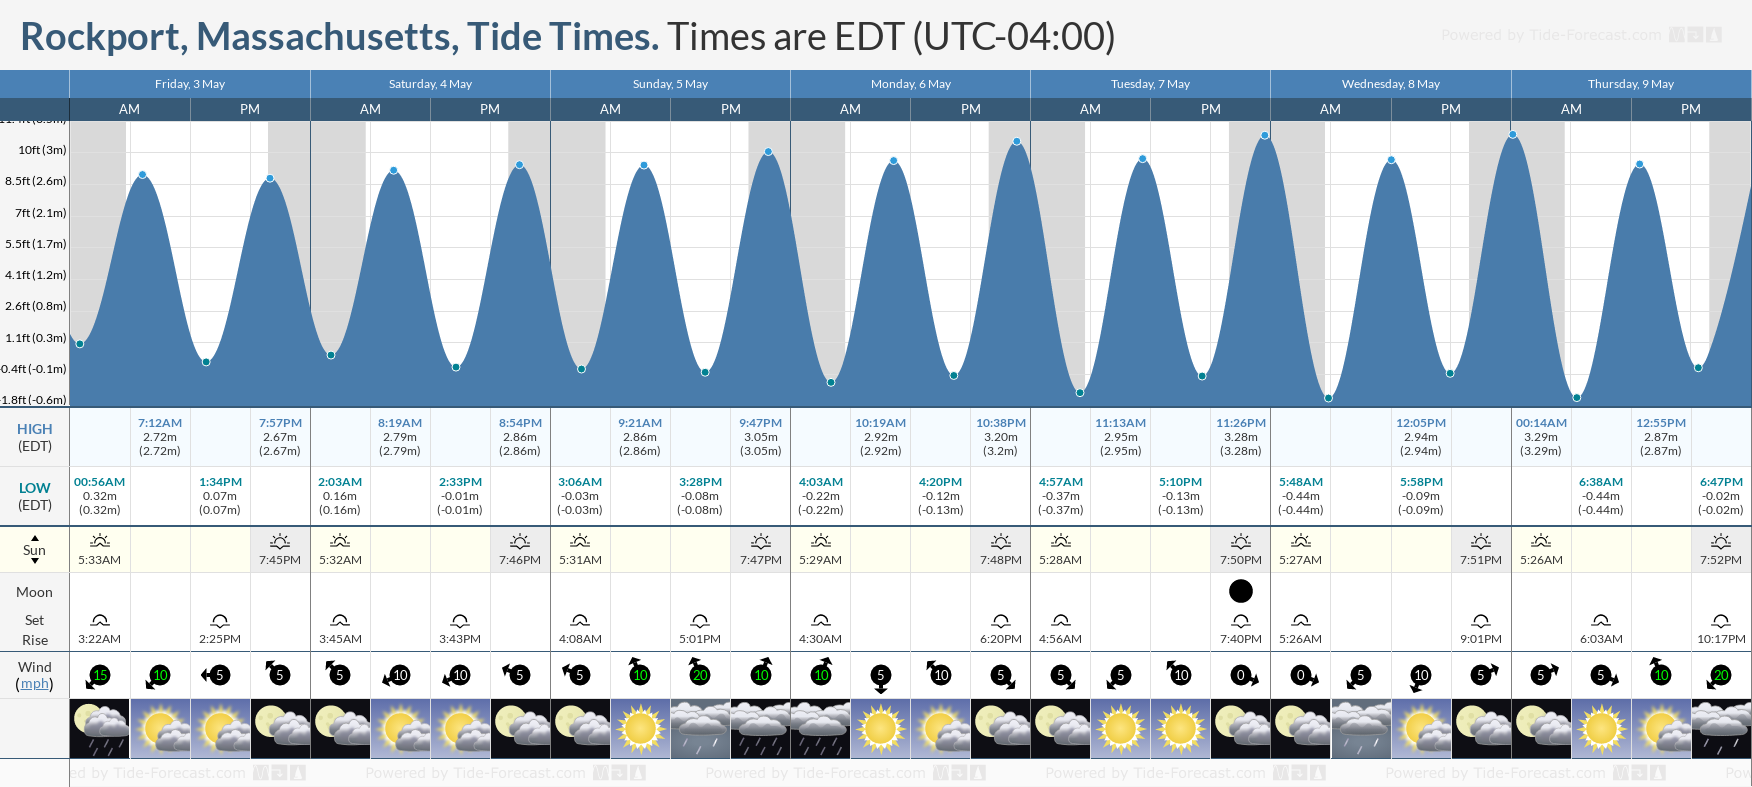 Rockport, Massachusetts Tide Chart including high and low tide tide times for the next 7 days